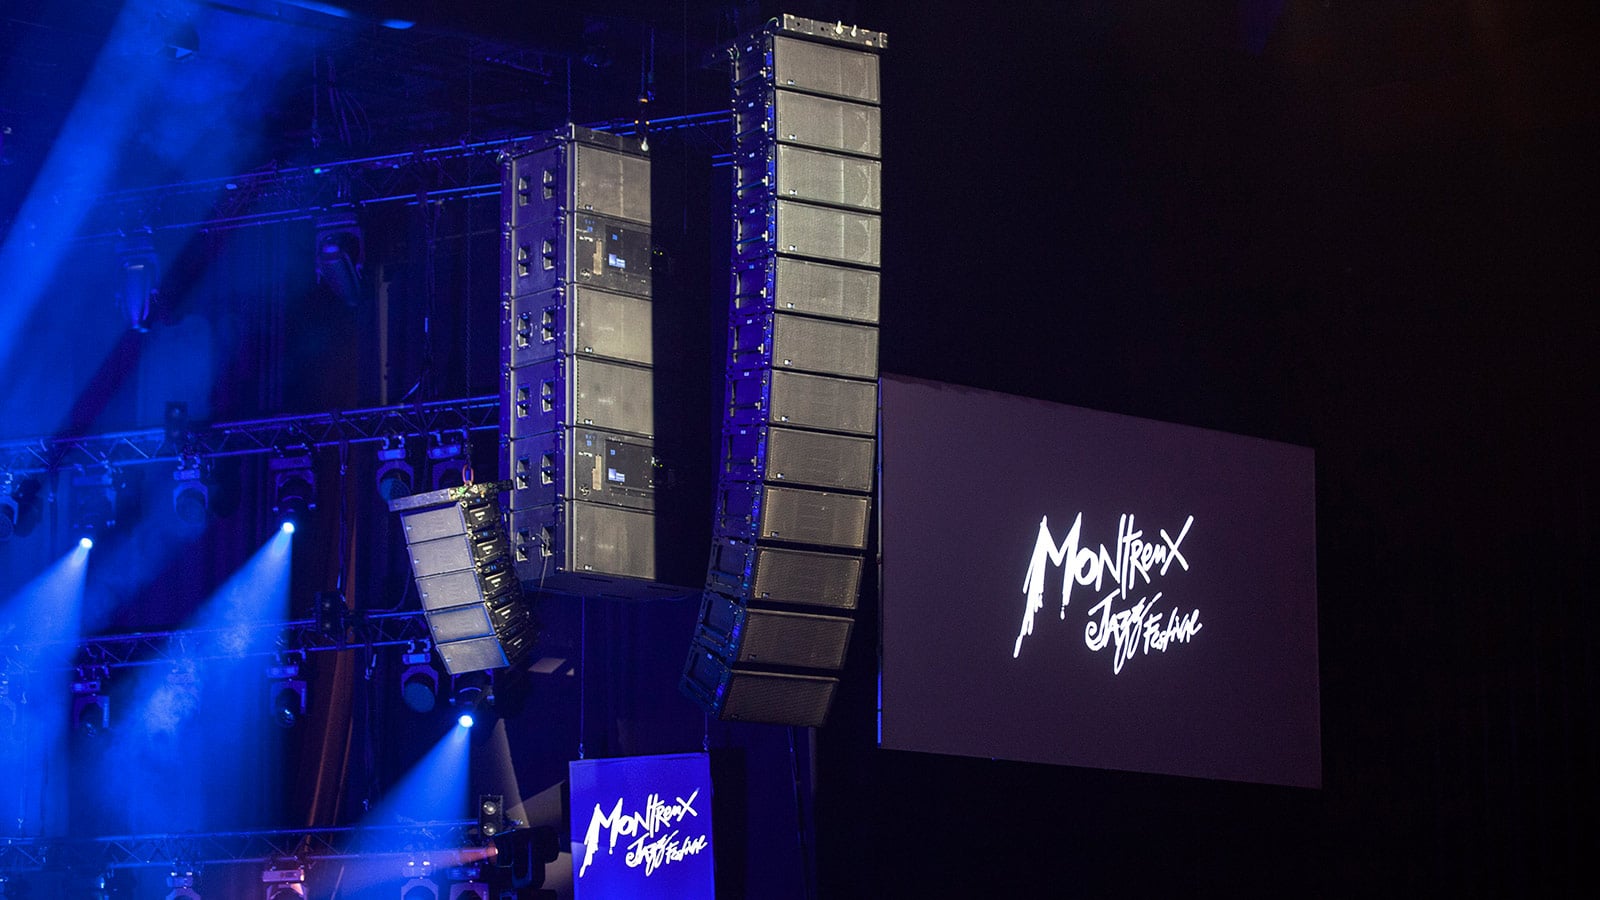 ULTRA-X40 Debut Highlights Meyer Sound’s 33rd Year at Montreux Jazz Festival